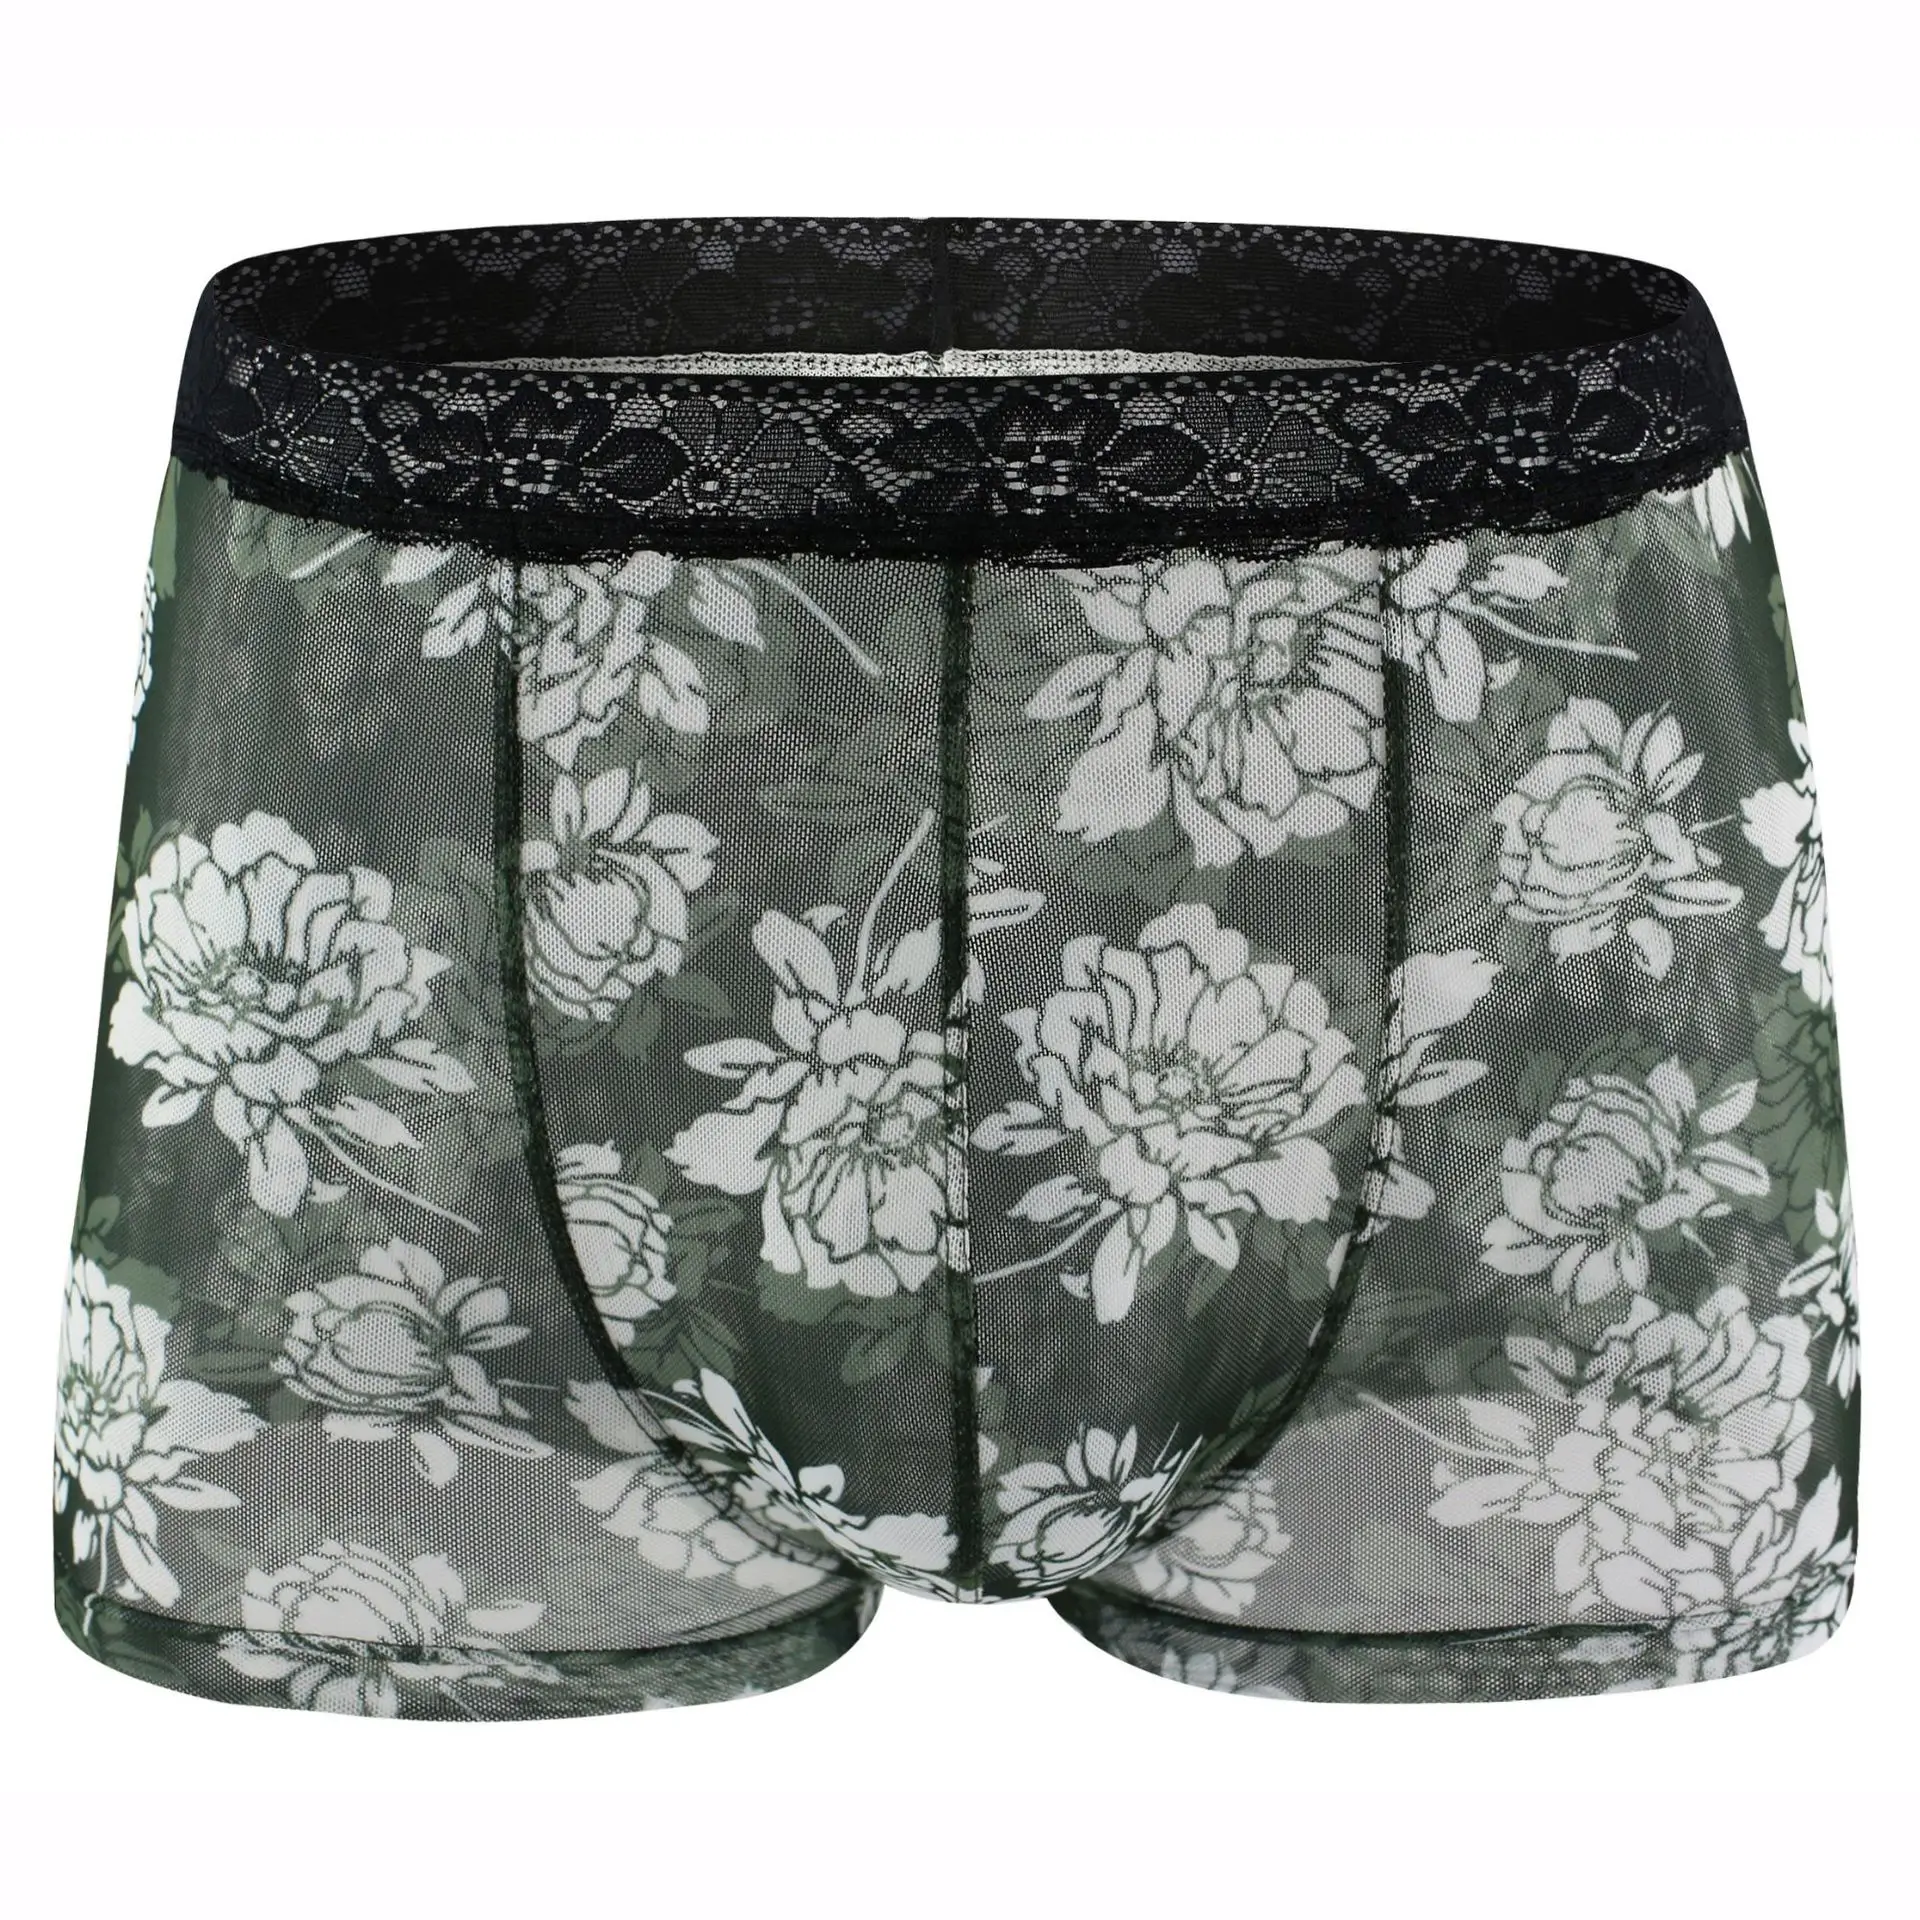 New Look Men Transparent Boxer Shorts Sexy Lace Underwear Male